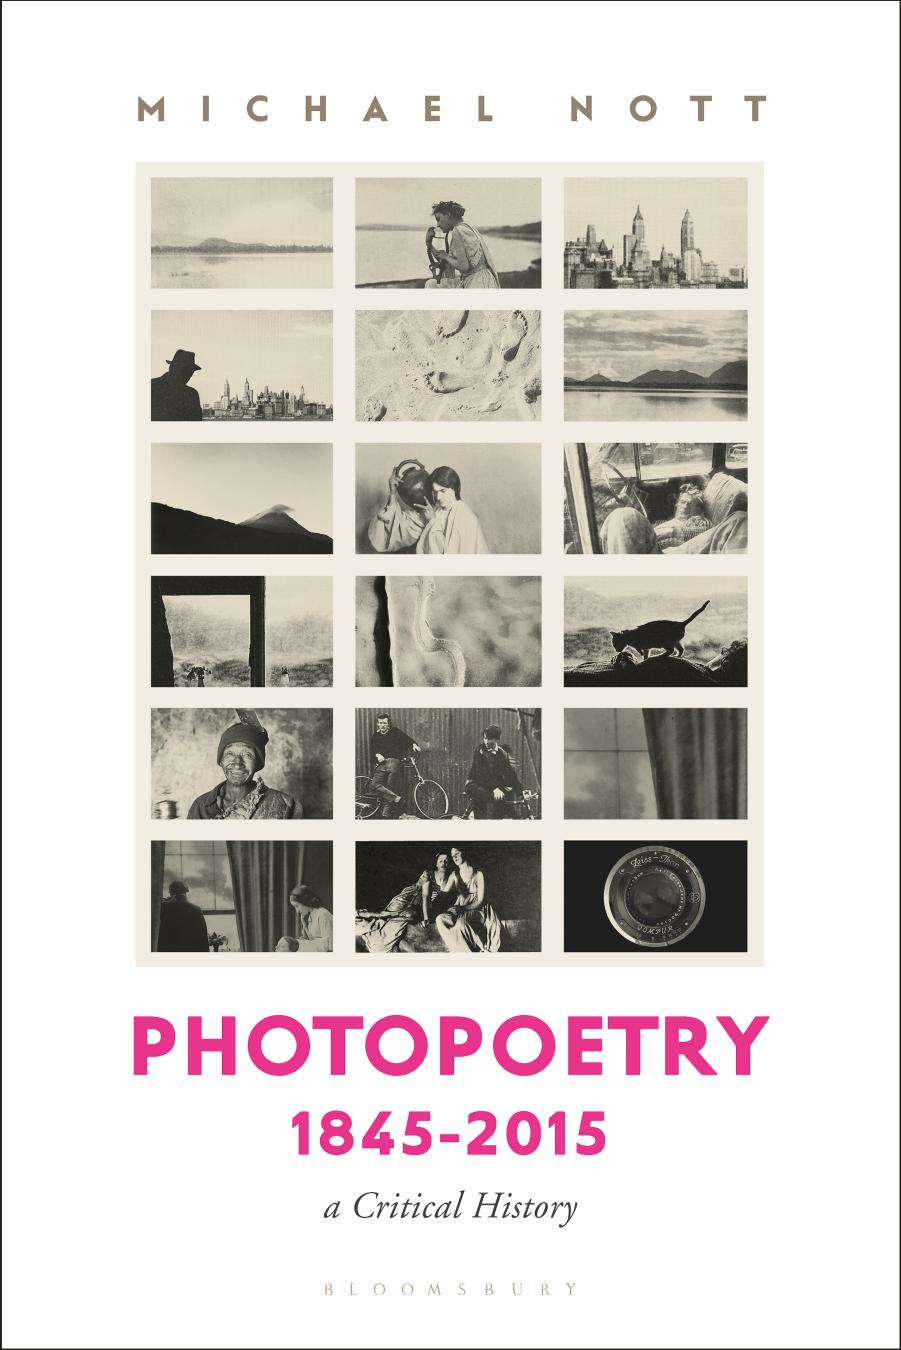 Photopoetry 1845-2015, a Critical History by Michael Nott